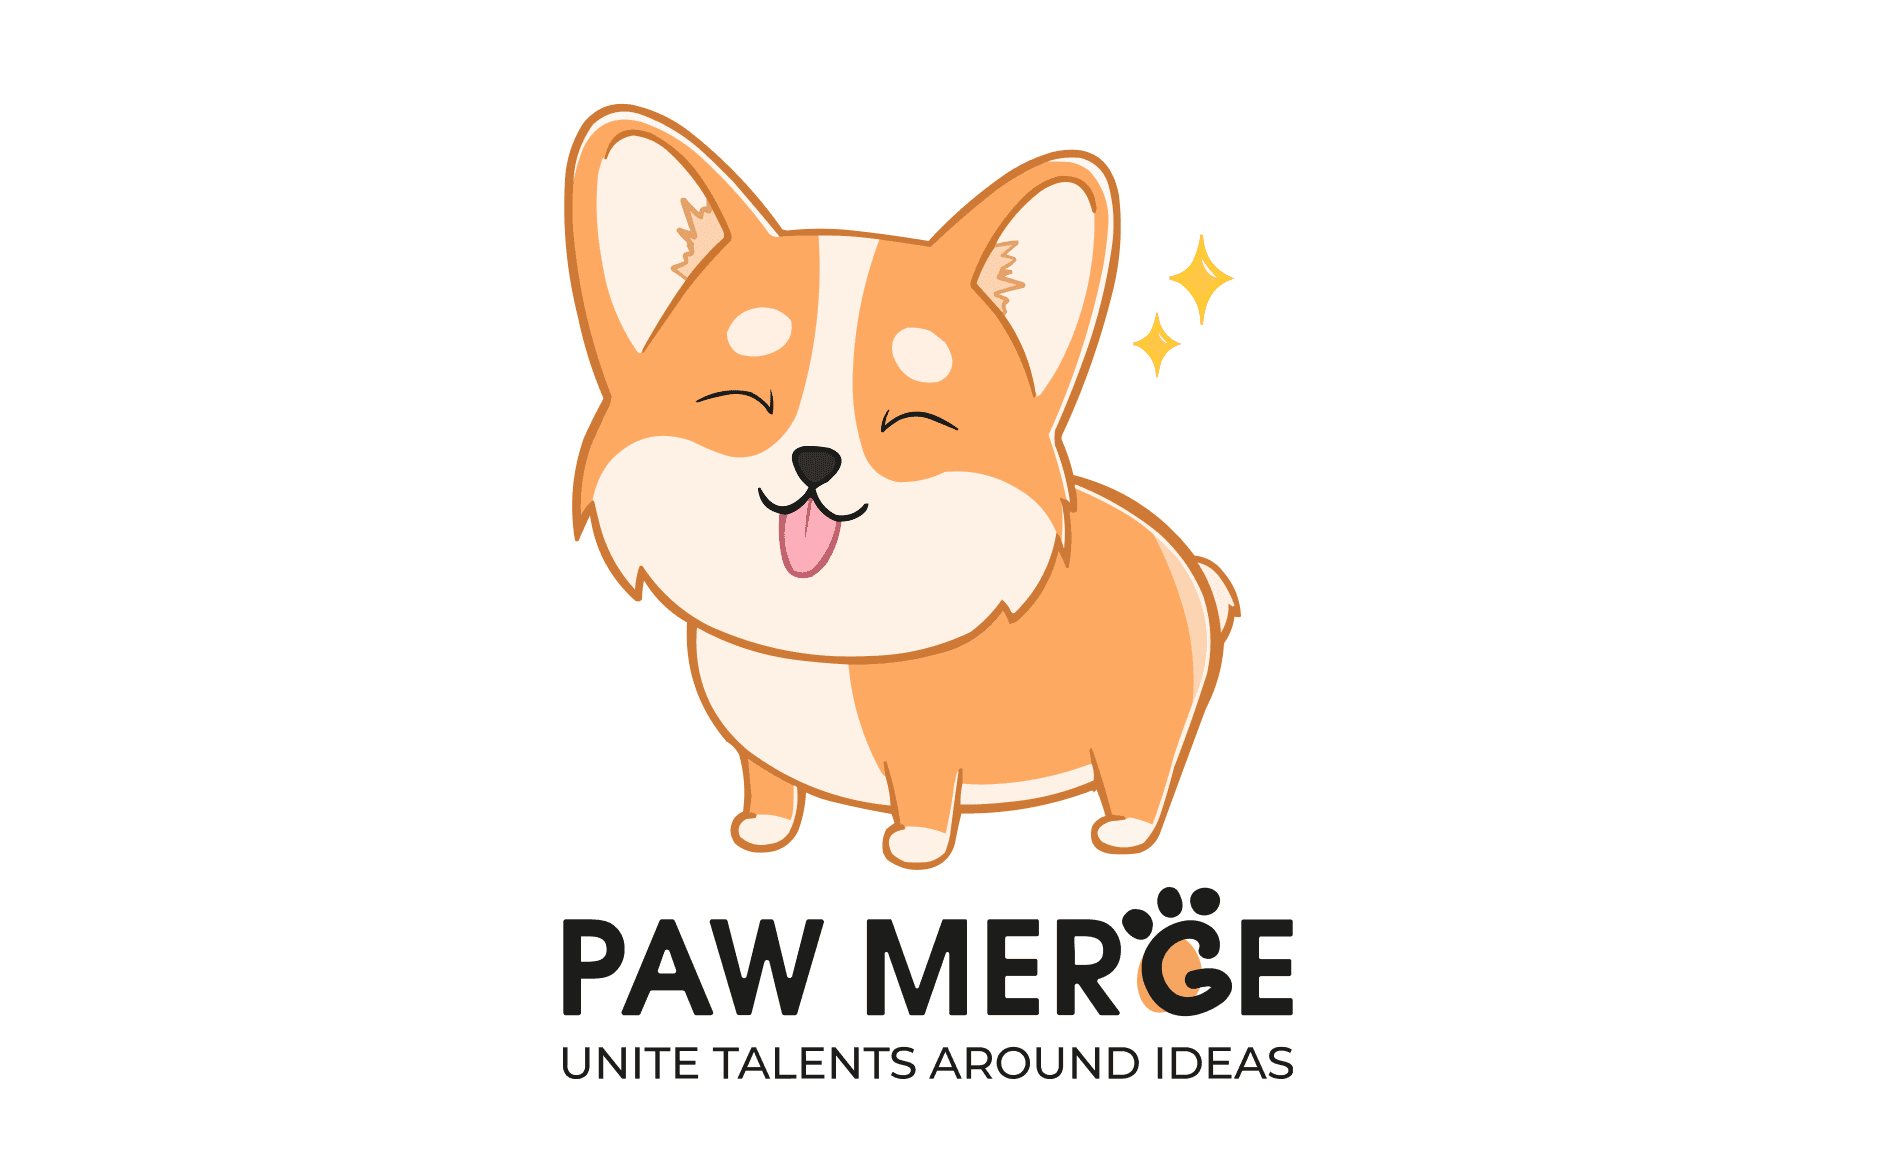 Paw Merge project